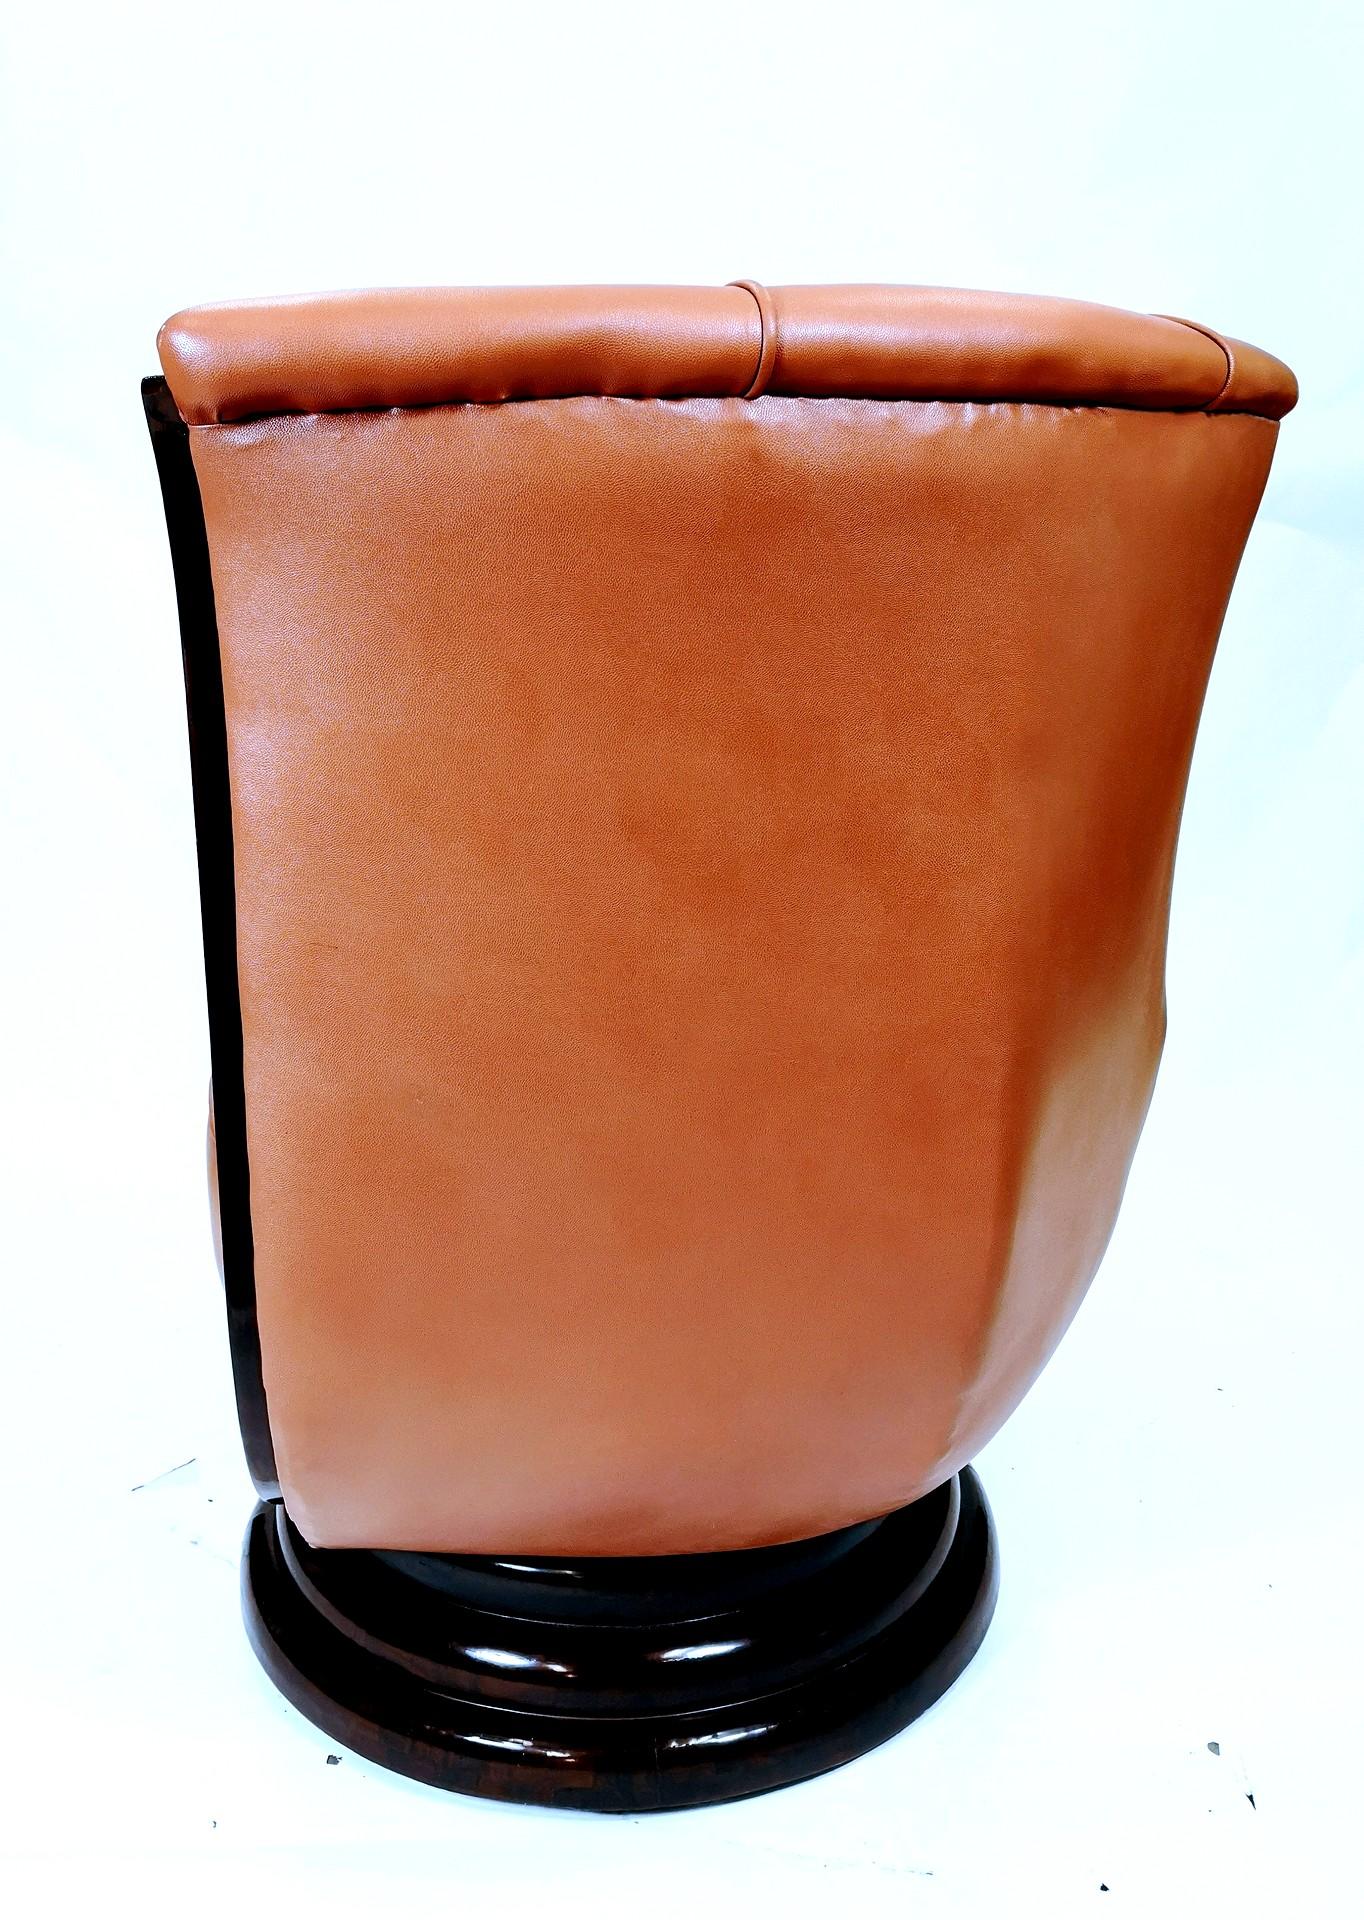 European Art Deco Lotus Shape Leatherette Armchair Pair from the 1930s For Sale